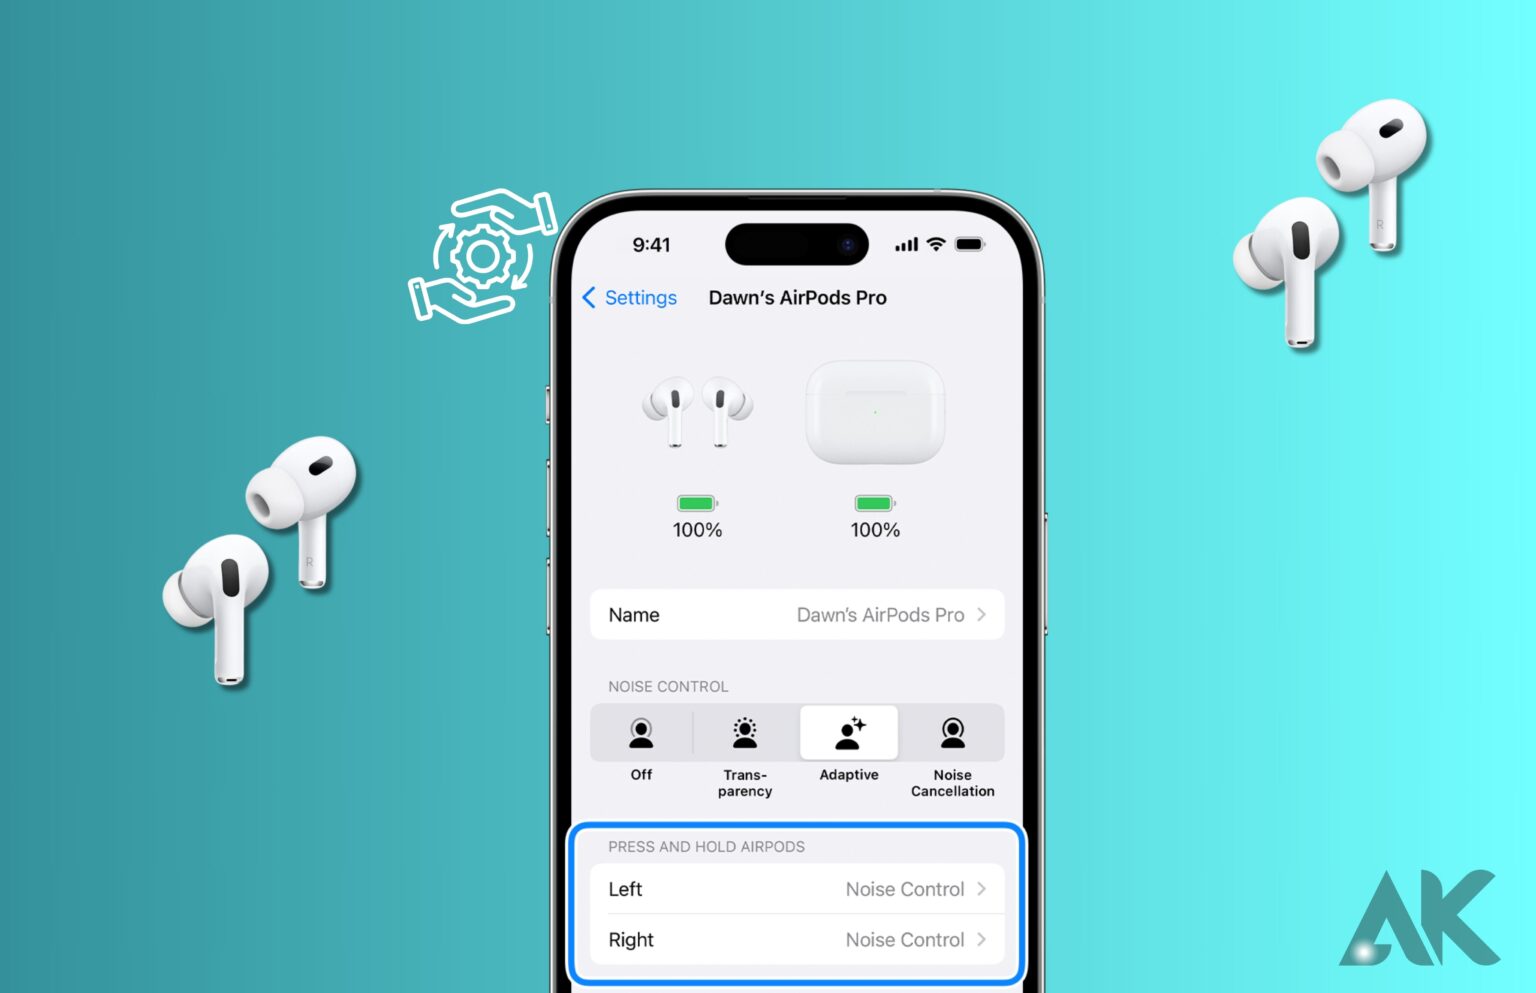 How to change AirPods settings